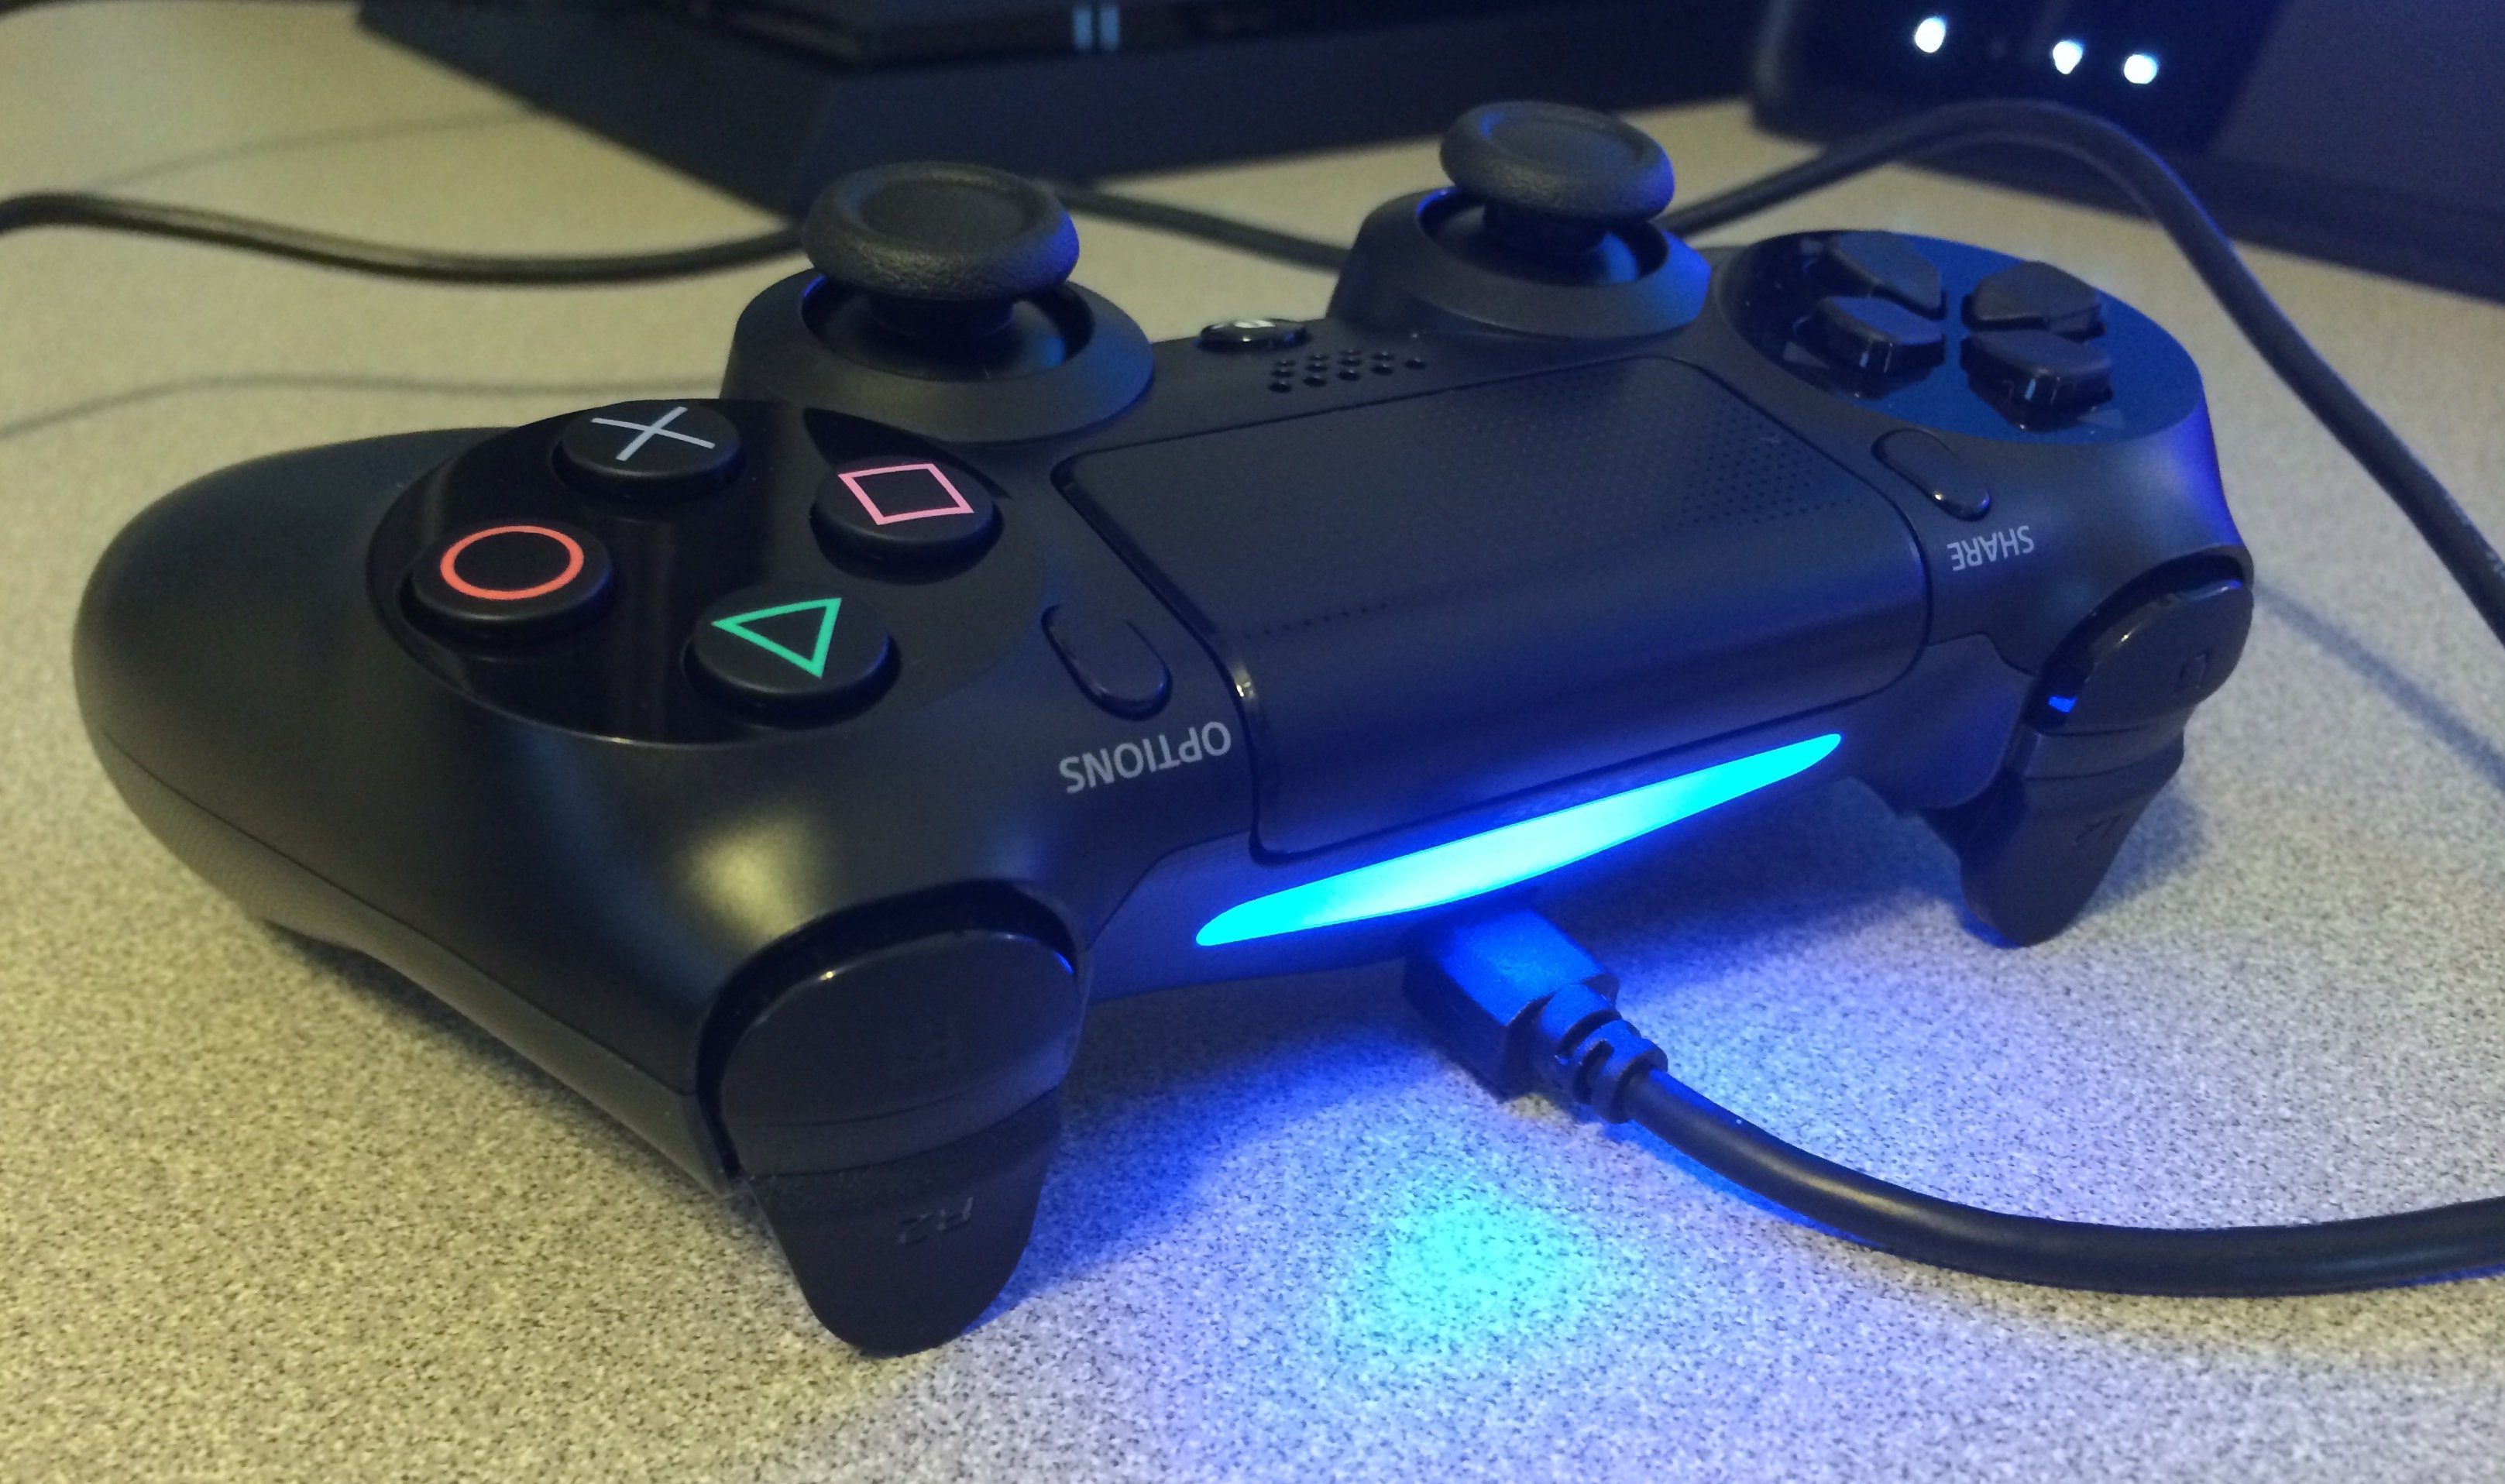 Connect the PS4 DualShock 4 controller with the included cable.